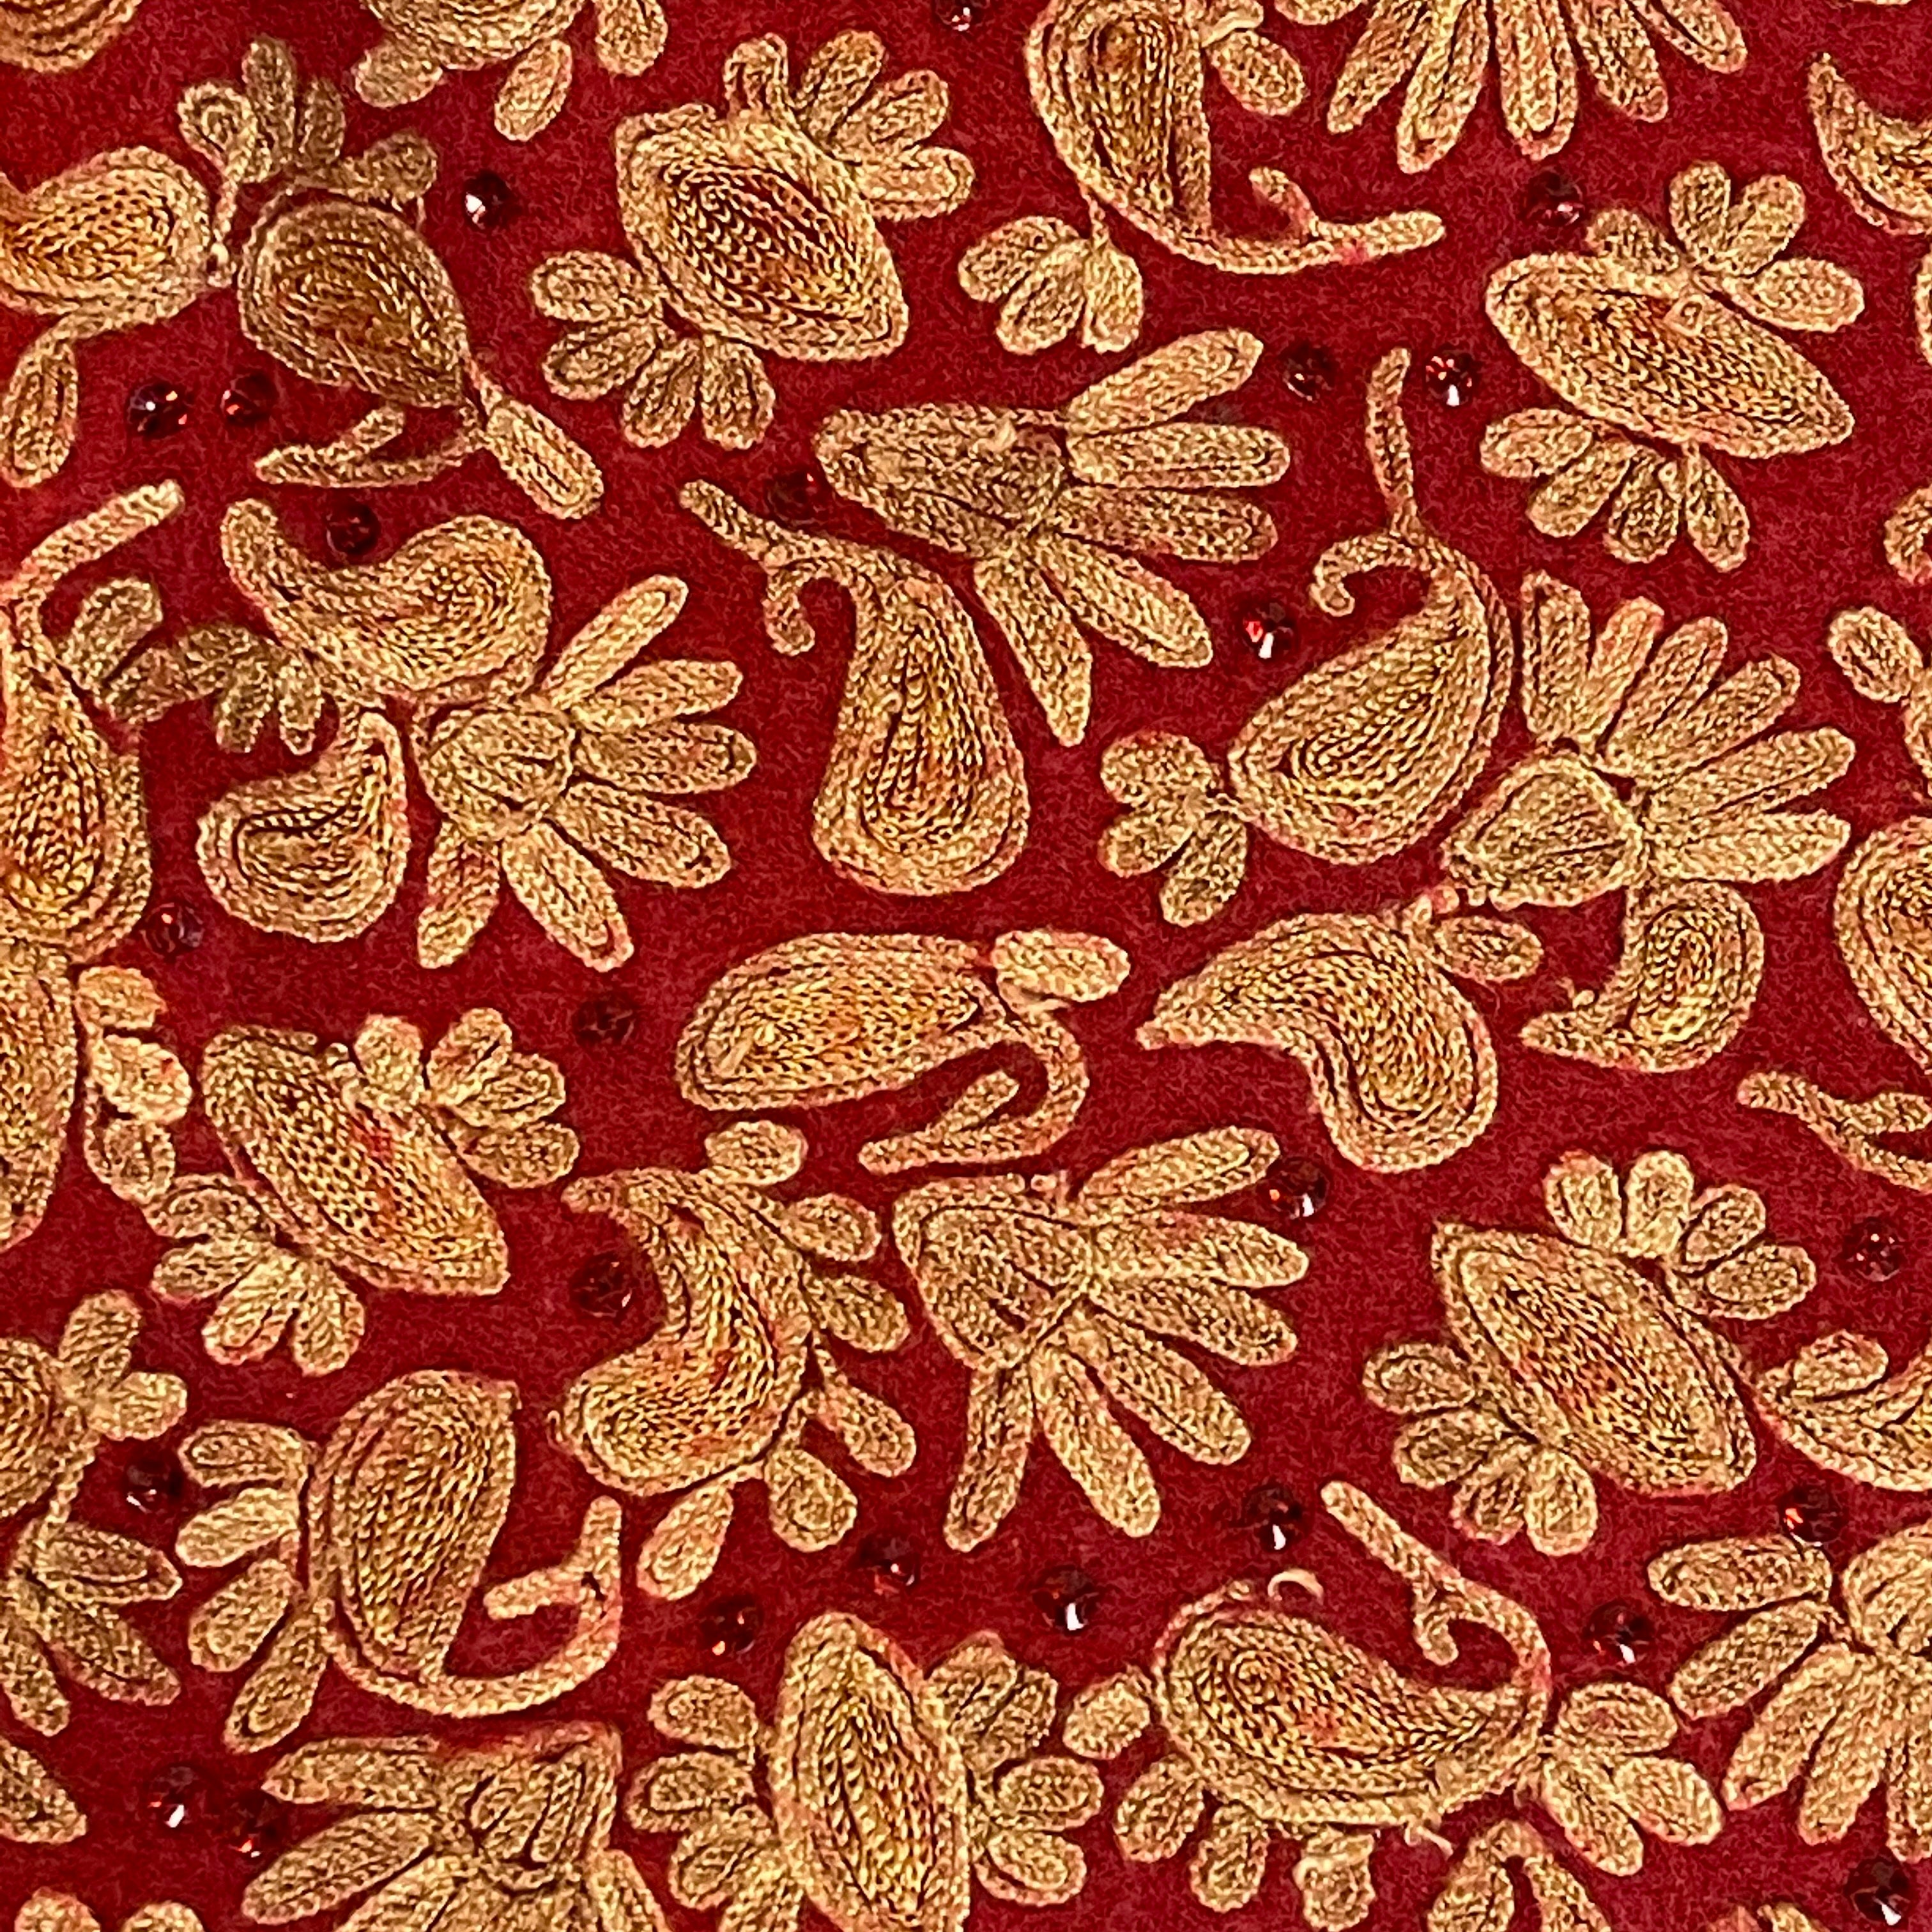 Red Embroidered  Woolen Shawl - Vintage India NYC